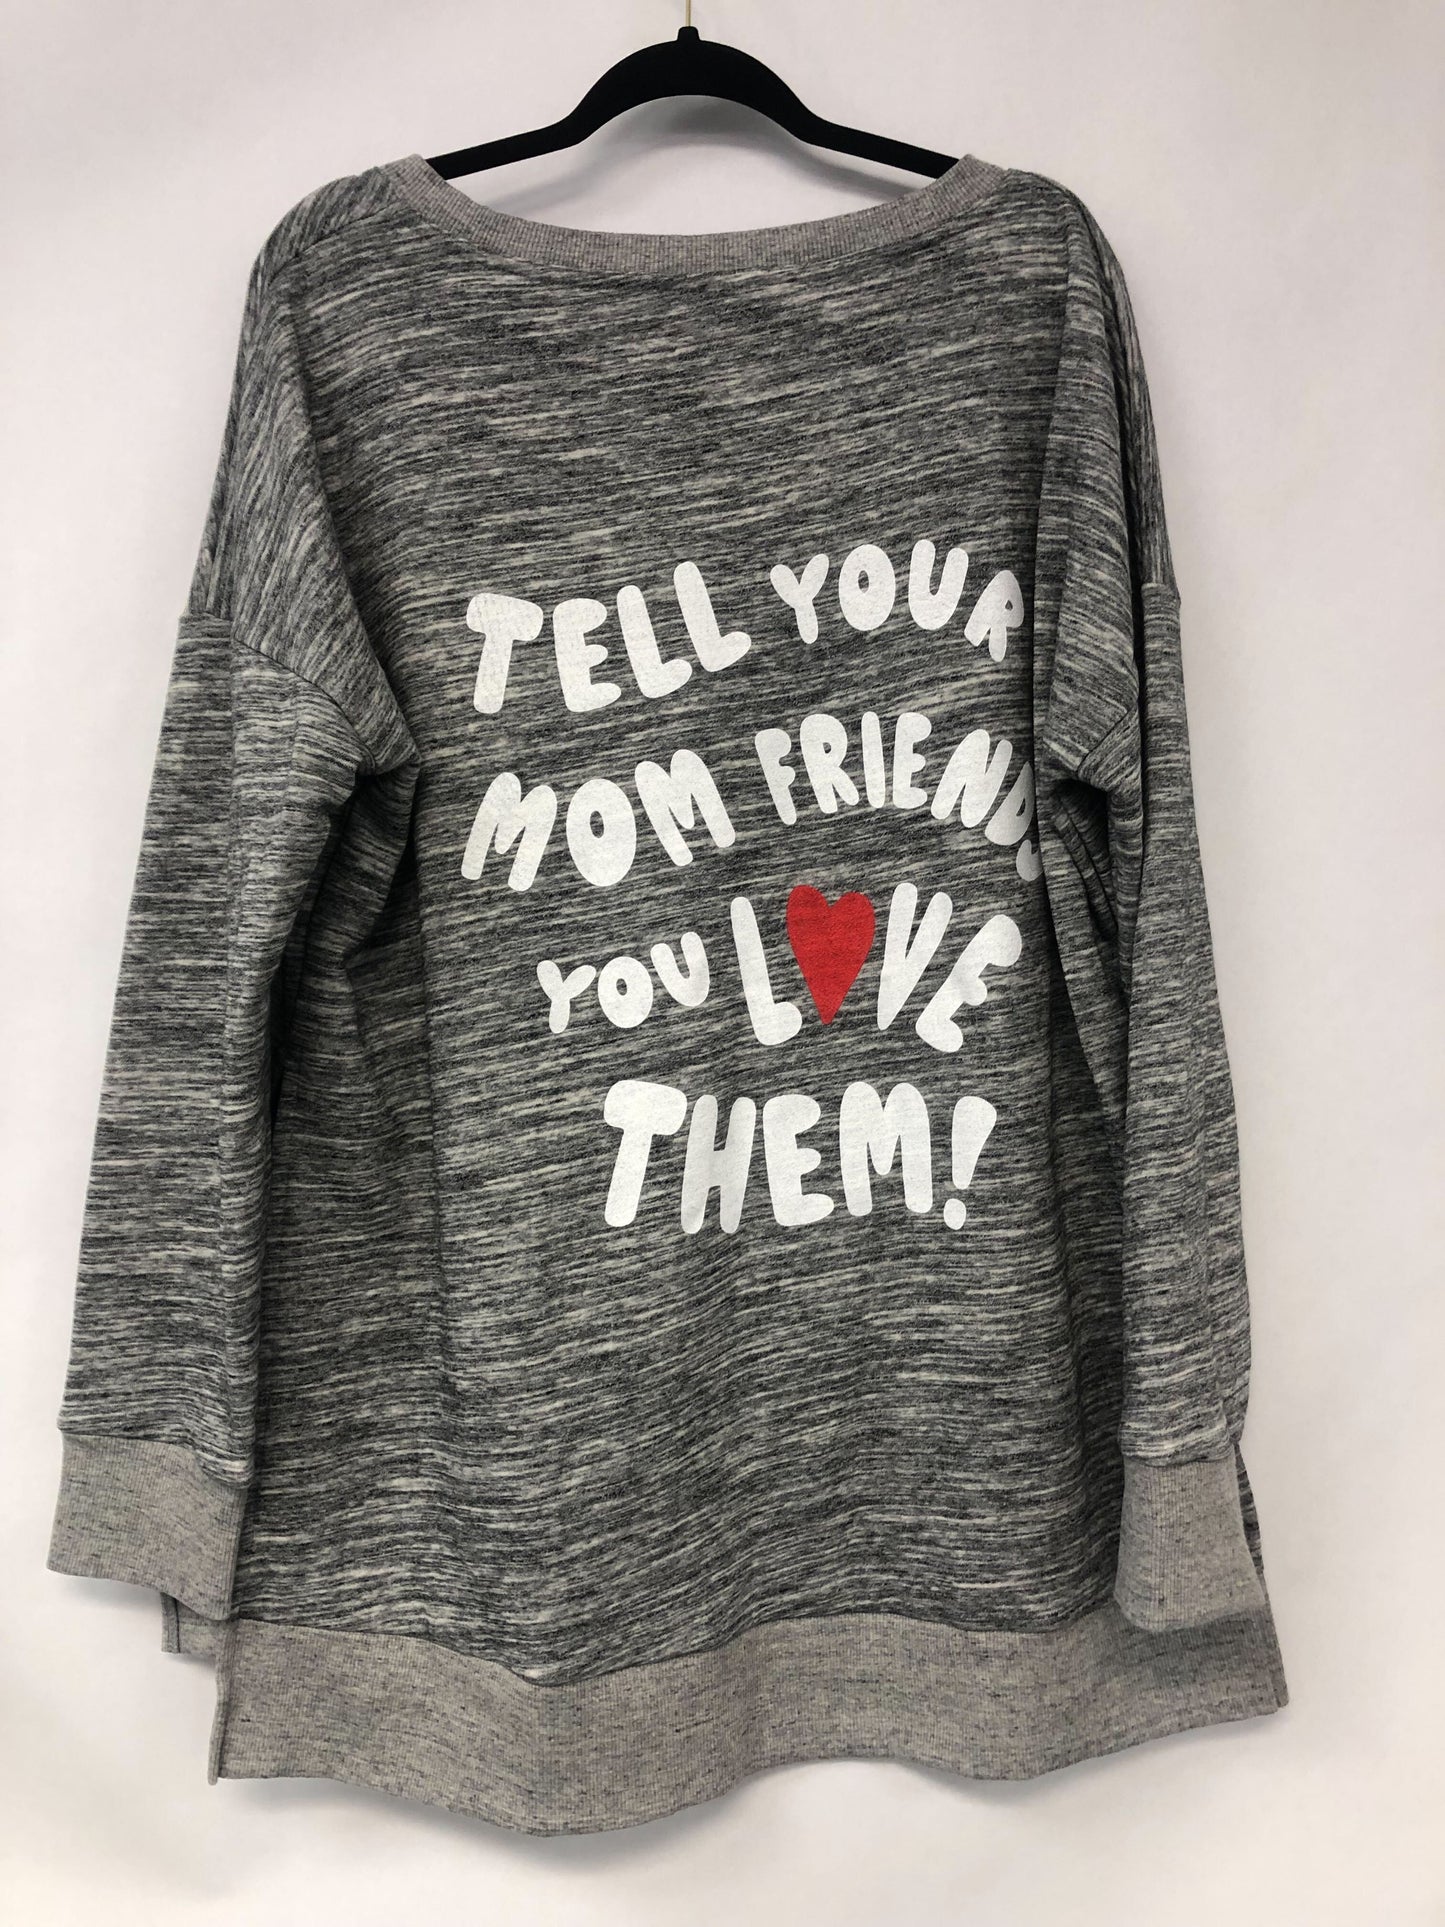 Outlet 6169 - Latched Mama Tell Your Mom Friends You Love Them Pullover - Dark Grey - XL/1X